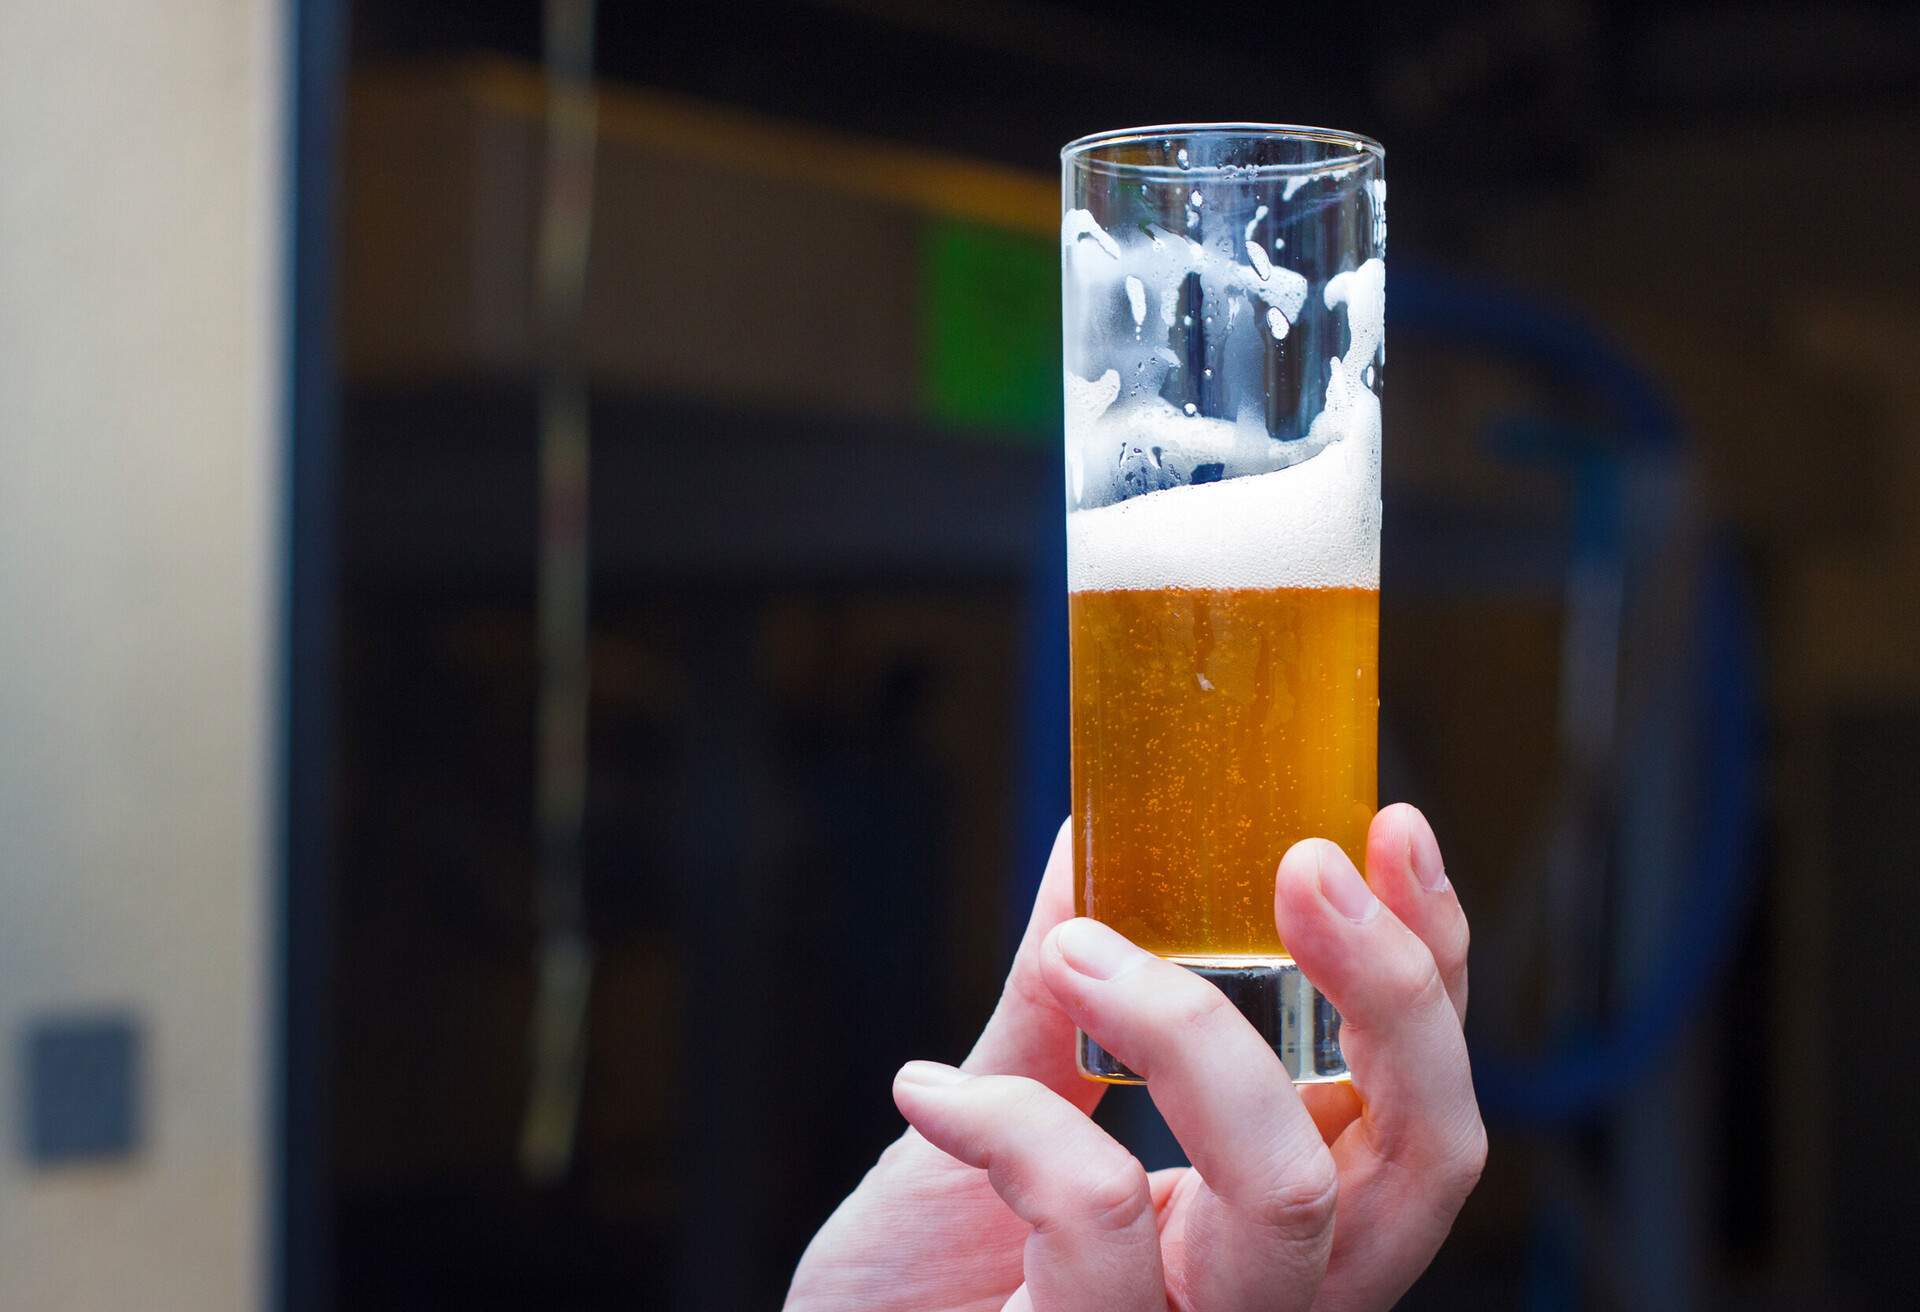 A hand holding a half-filled glass of beer.